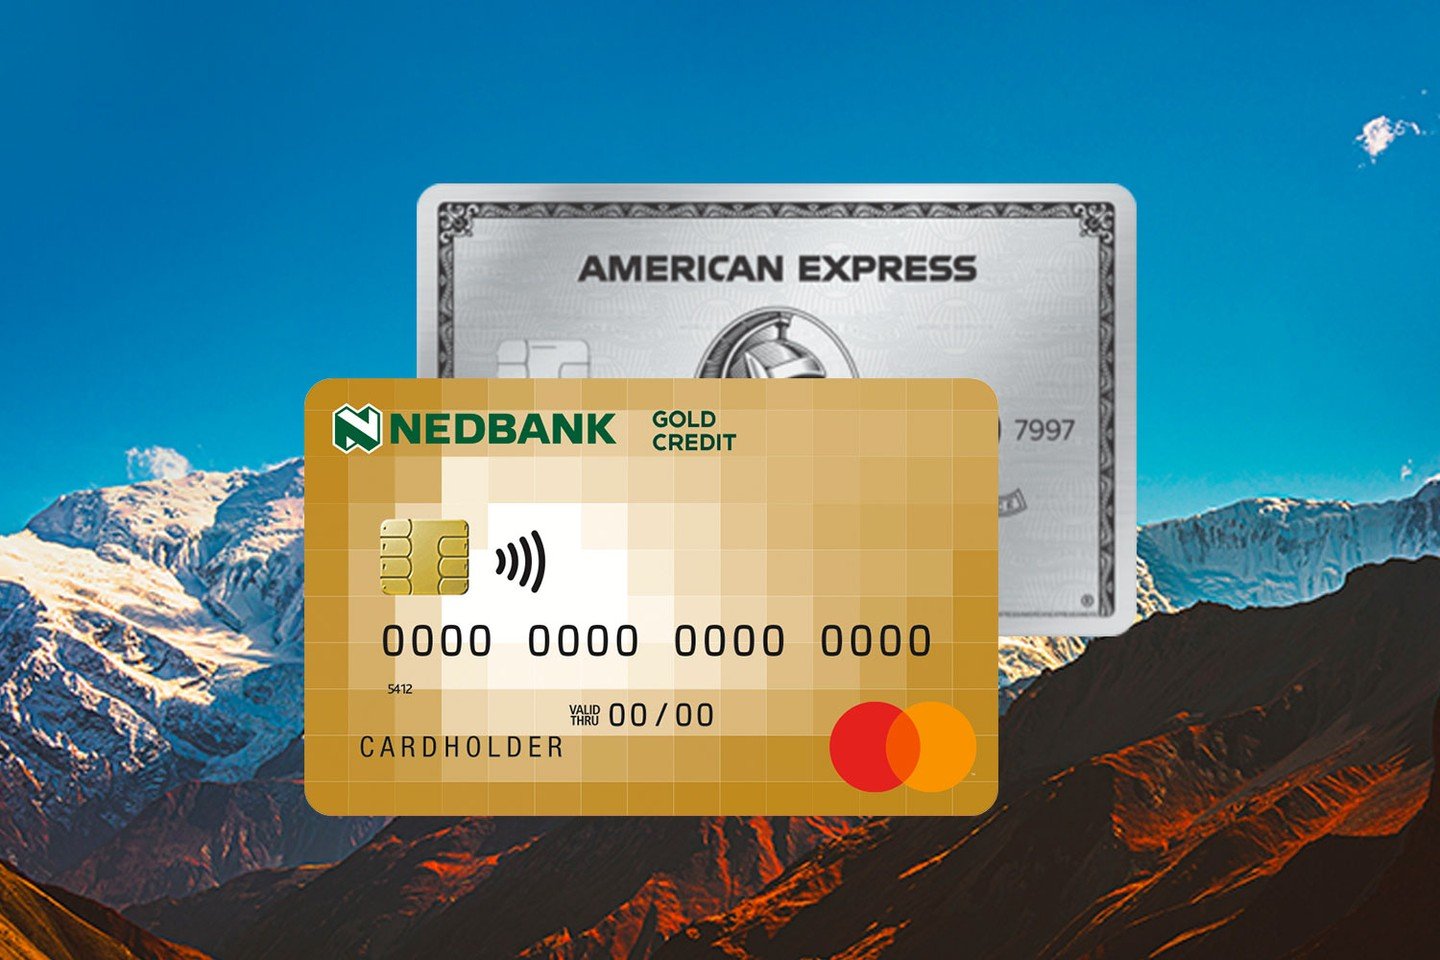 Nedbank and American Express July and August 2021 Promotional Campaign